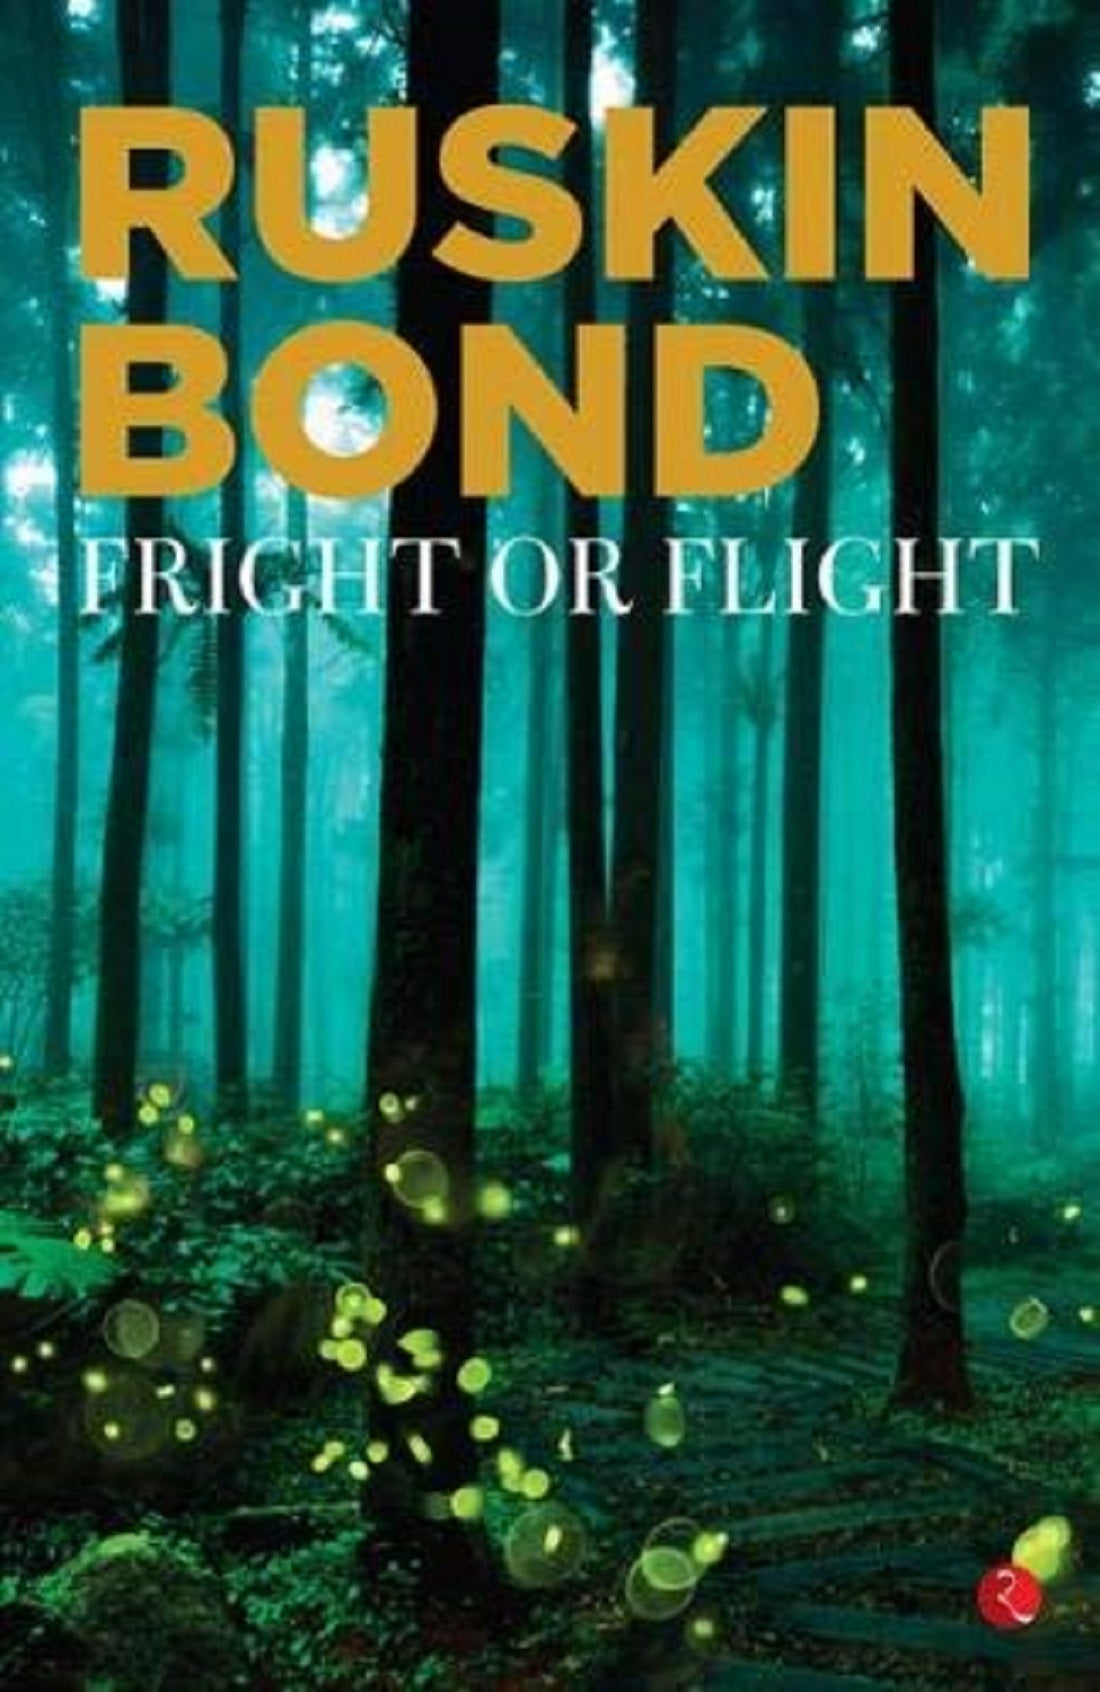 FRIGHT OR FLIGHT AND OTHER STORIES